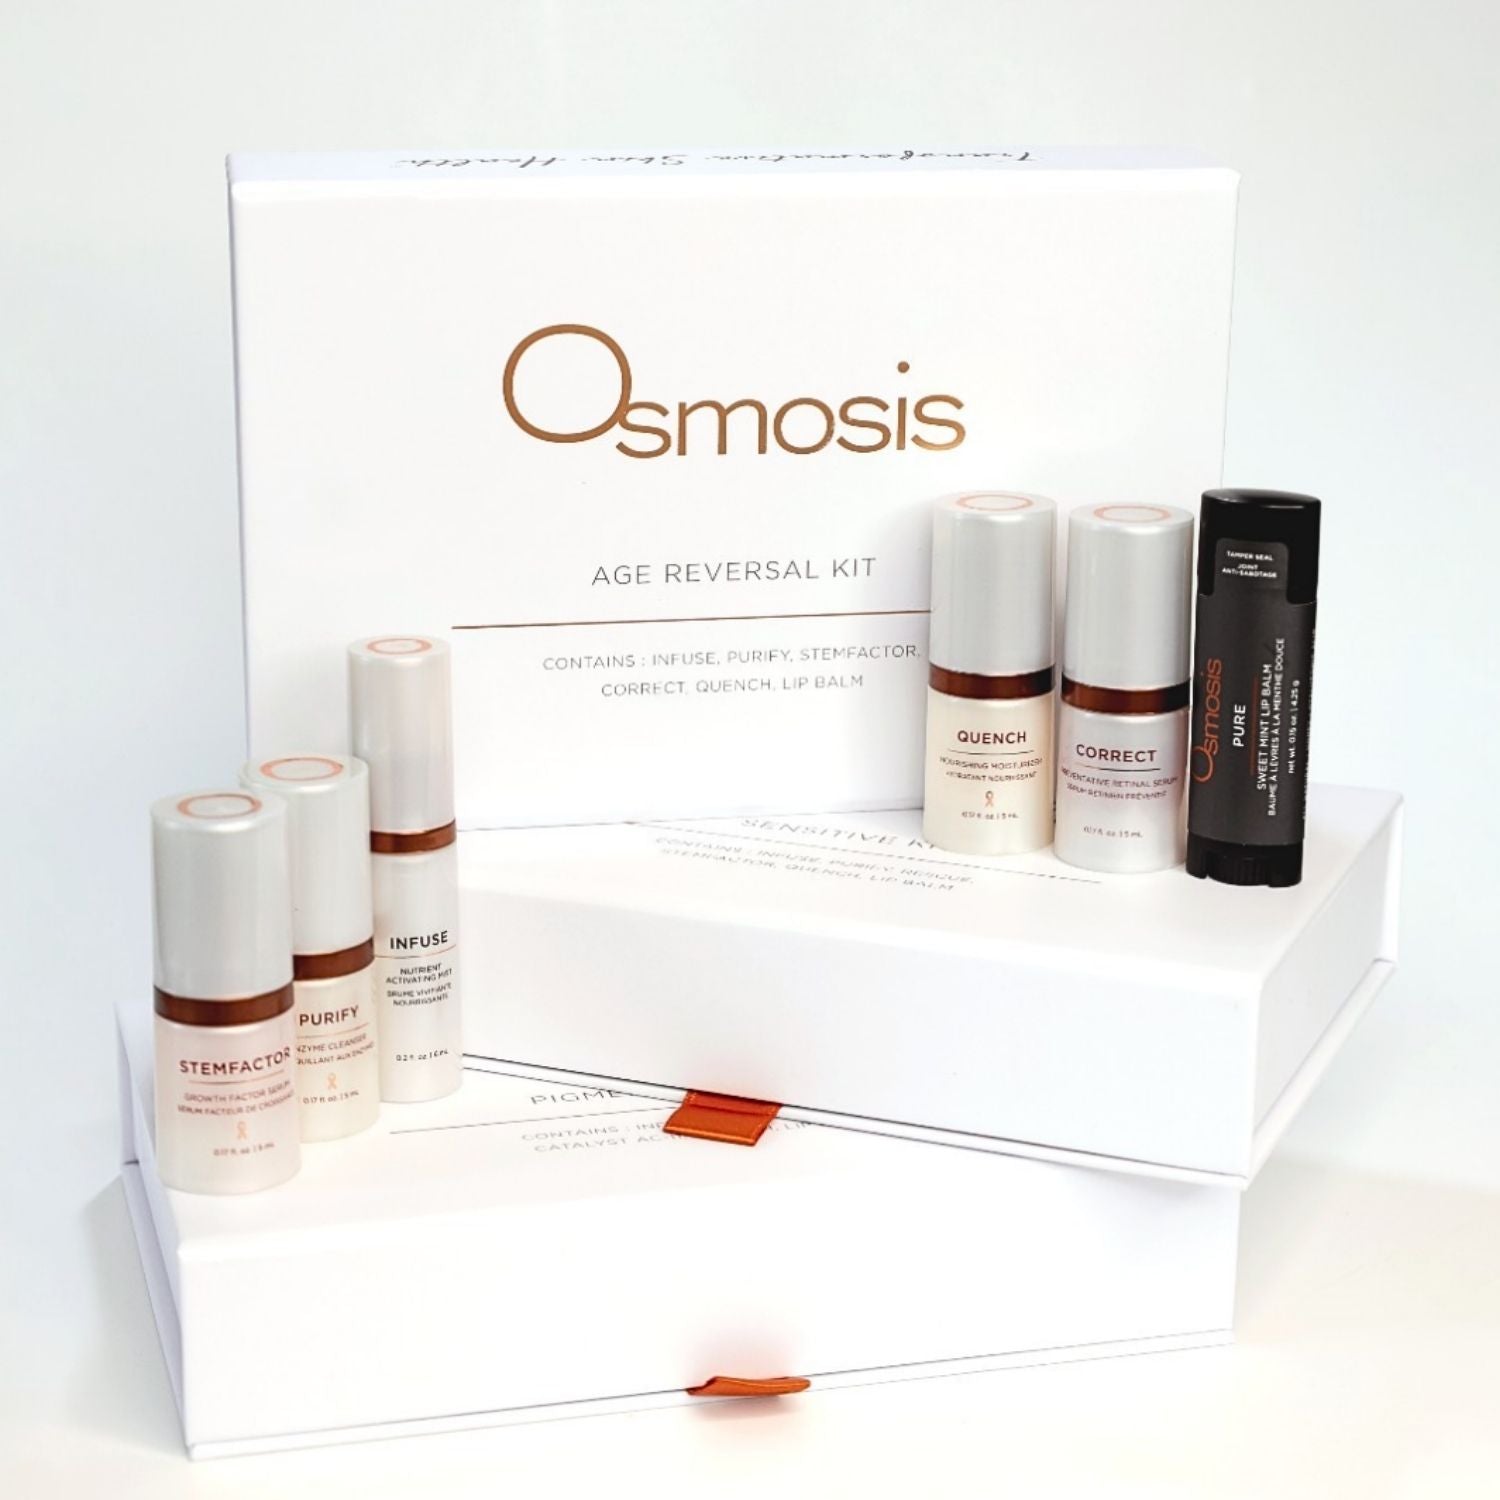 Pearl and bronze colored osmosis skincare bottles displayed in front of white box on a white background